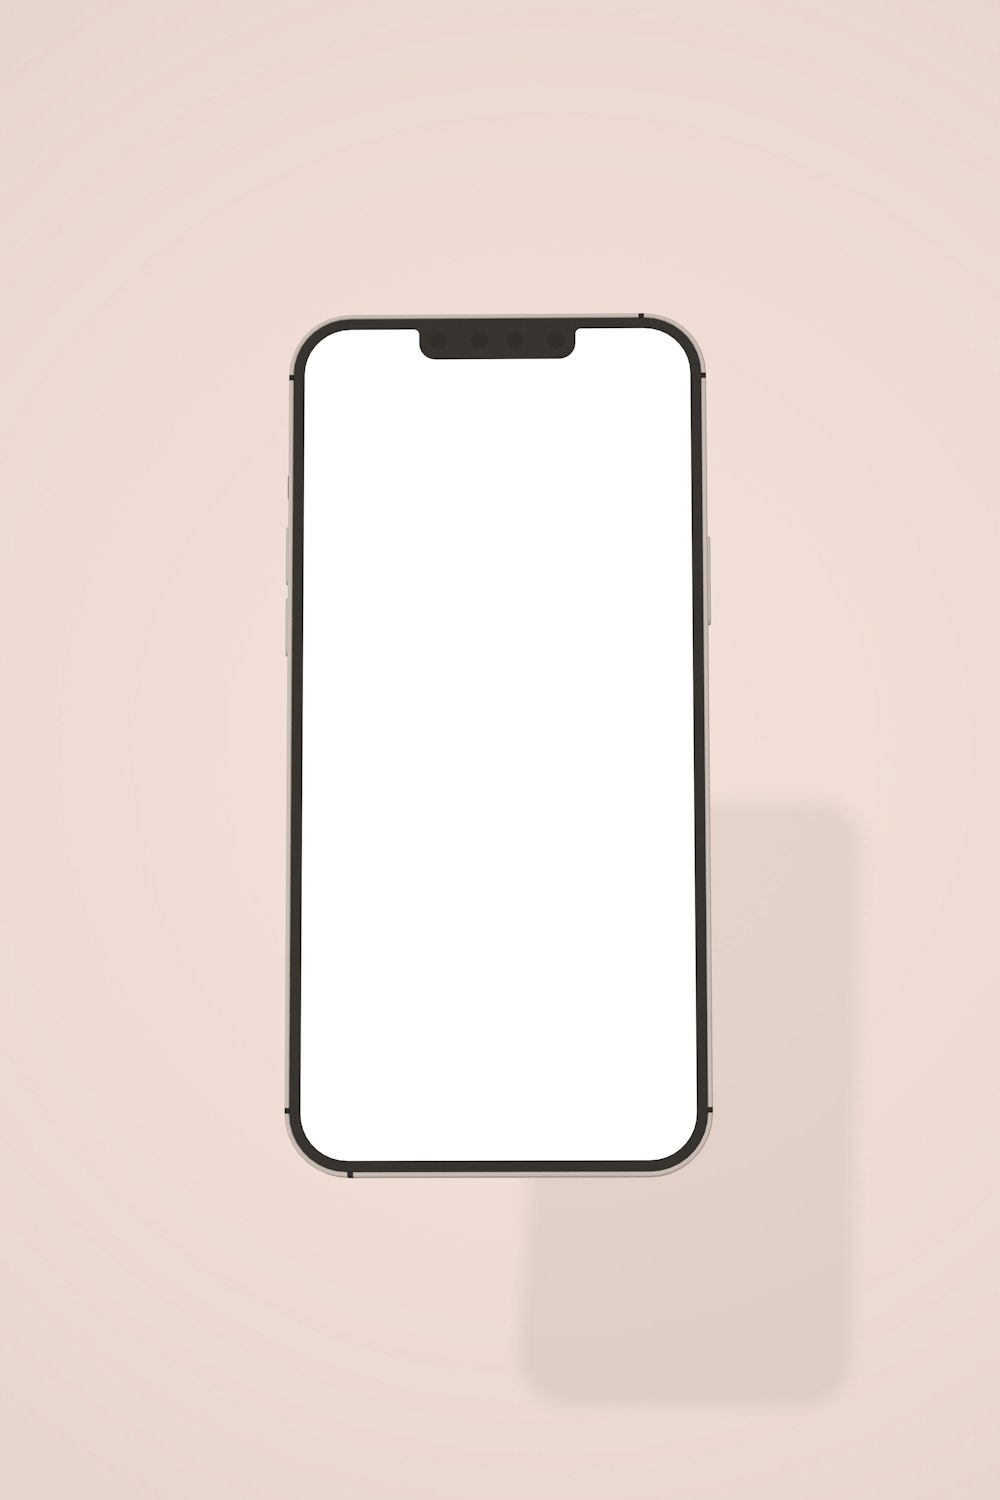 a white phone with a black frame on a pink background